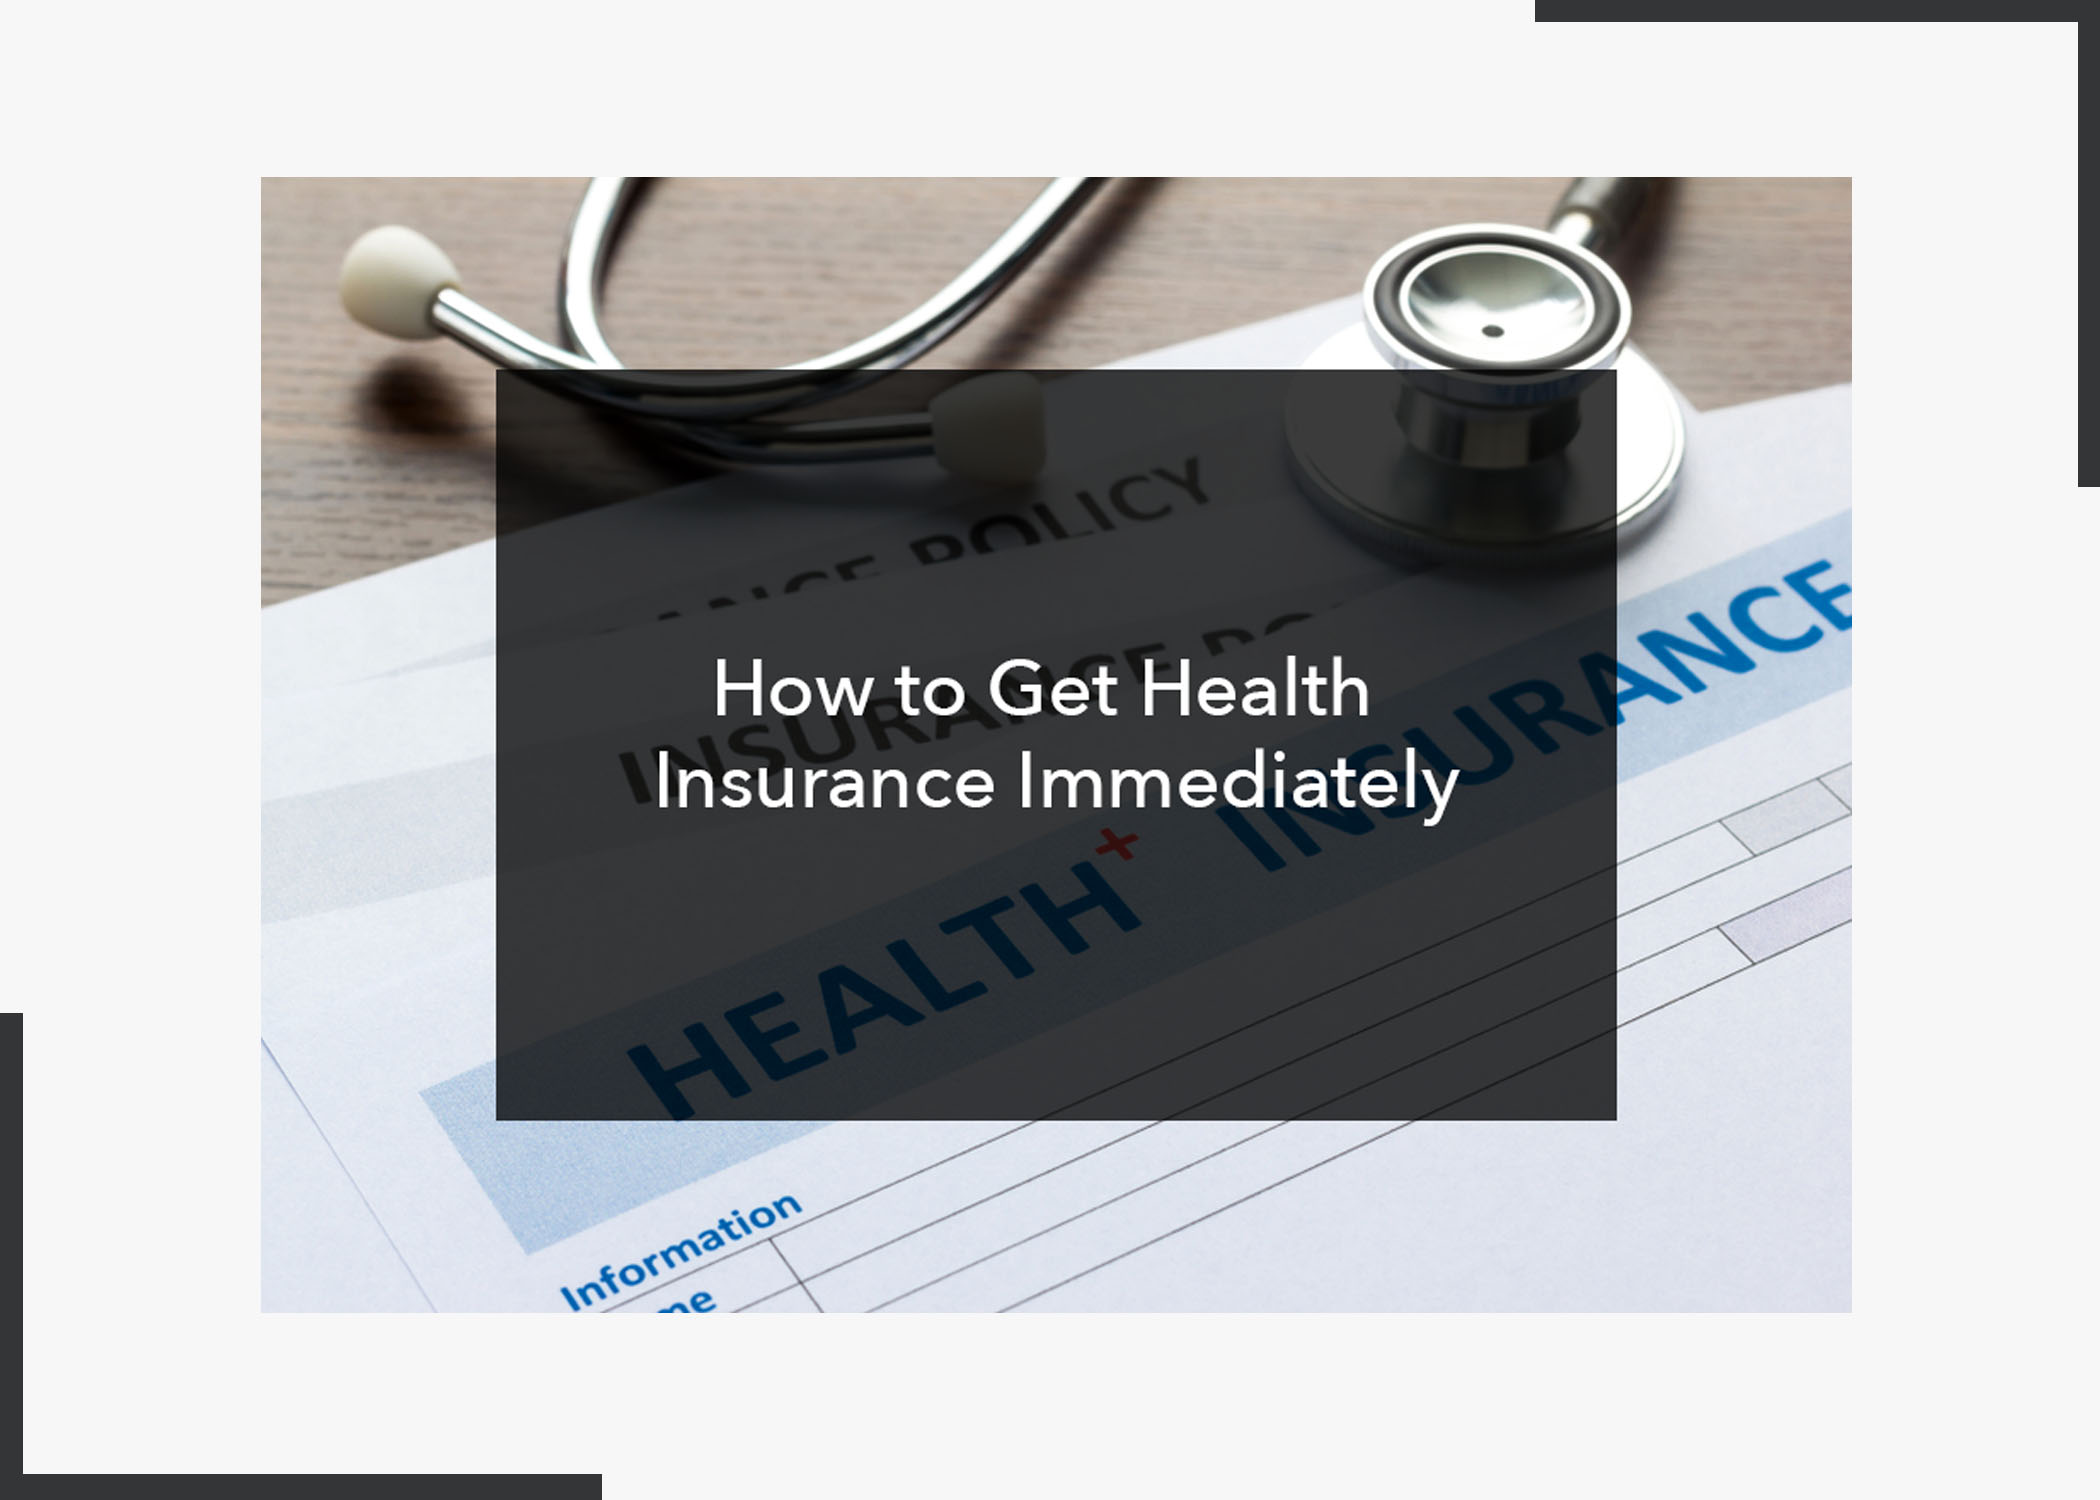 How to Get Health Insurance Immediately